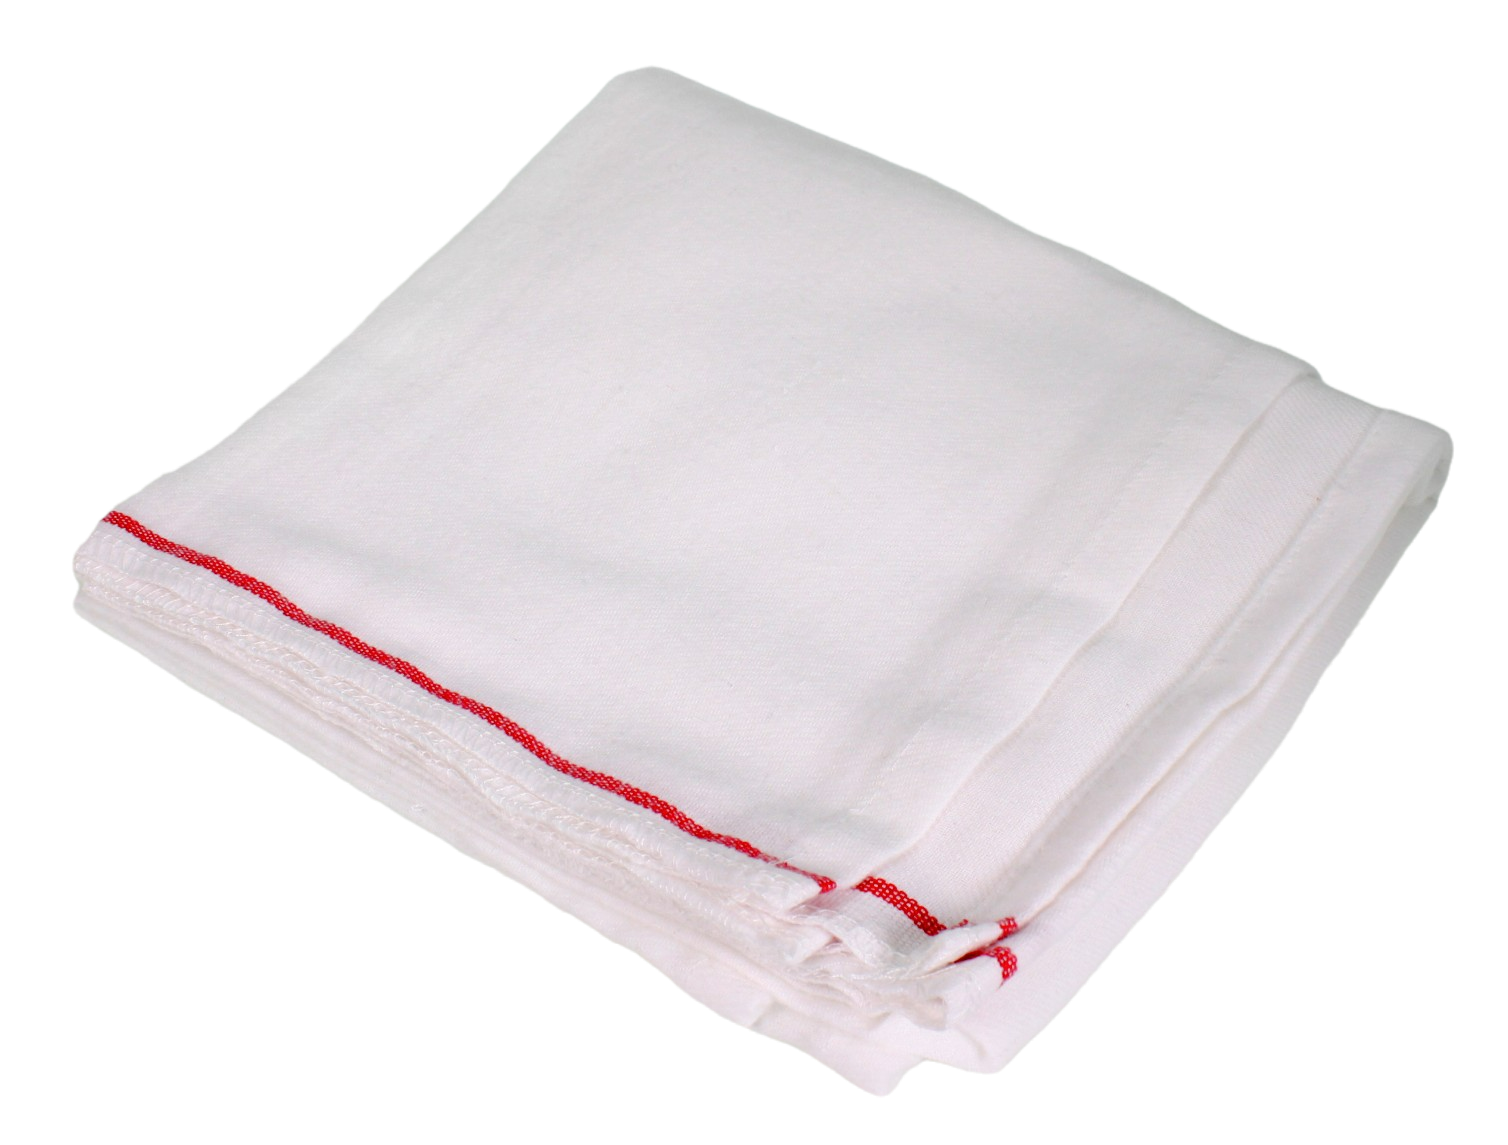 Folded cotton towel, with a red strip